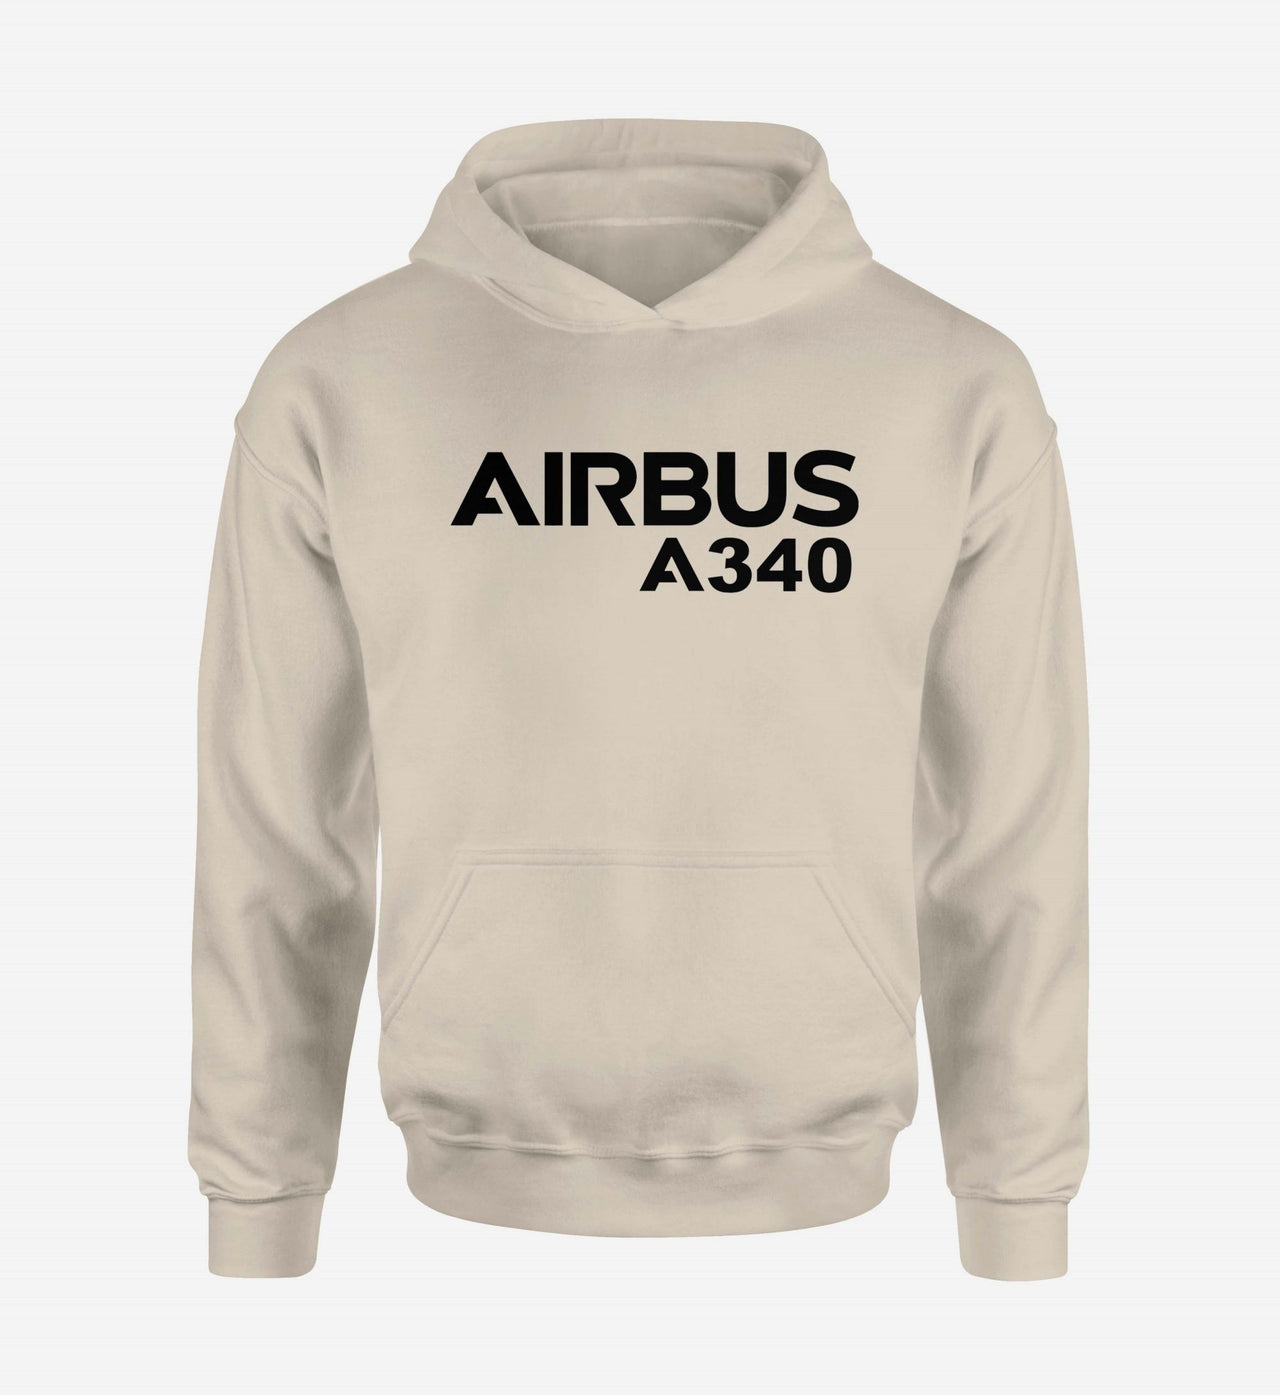 Airbus A340 & Text Designed Hoodies